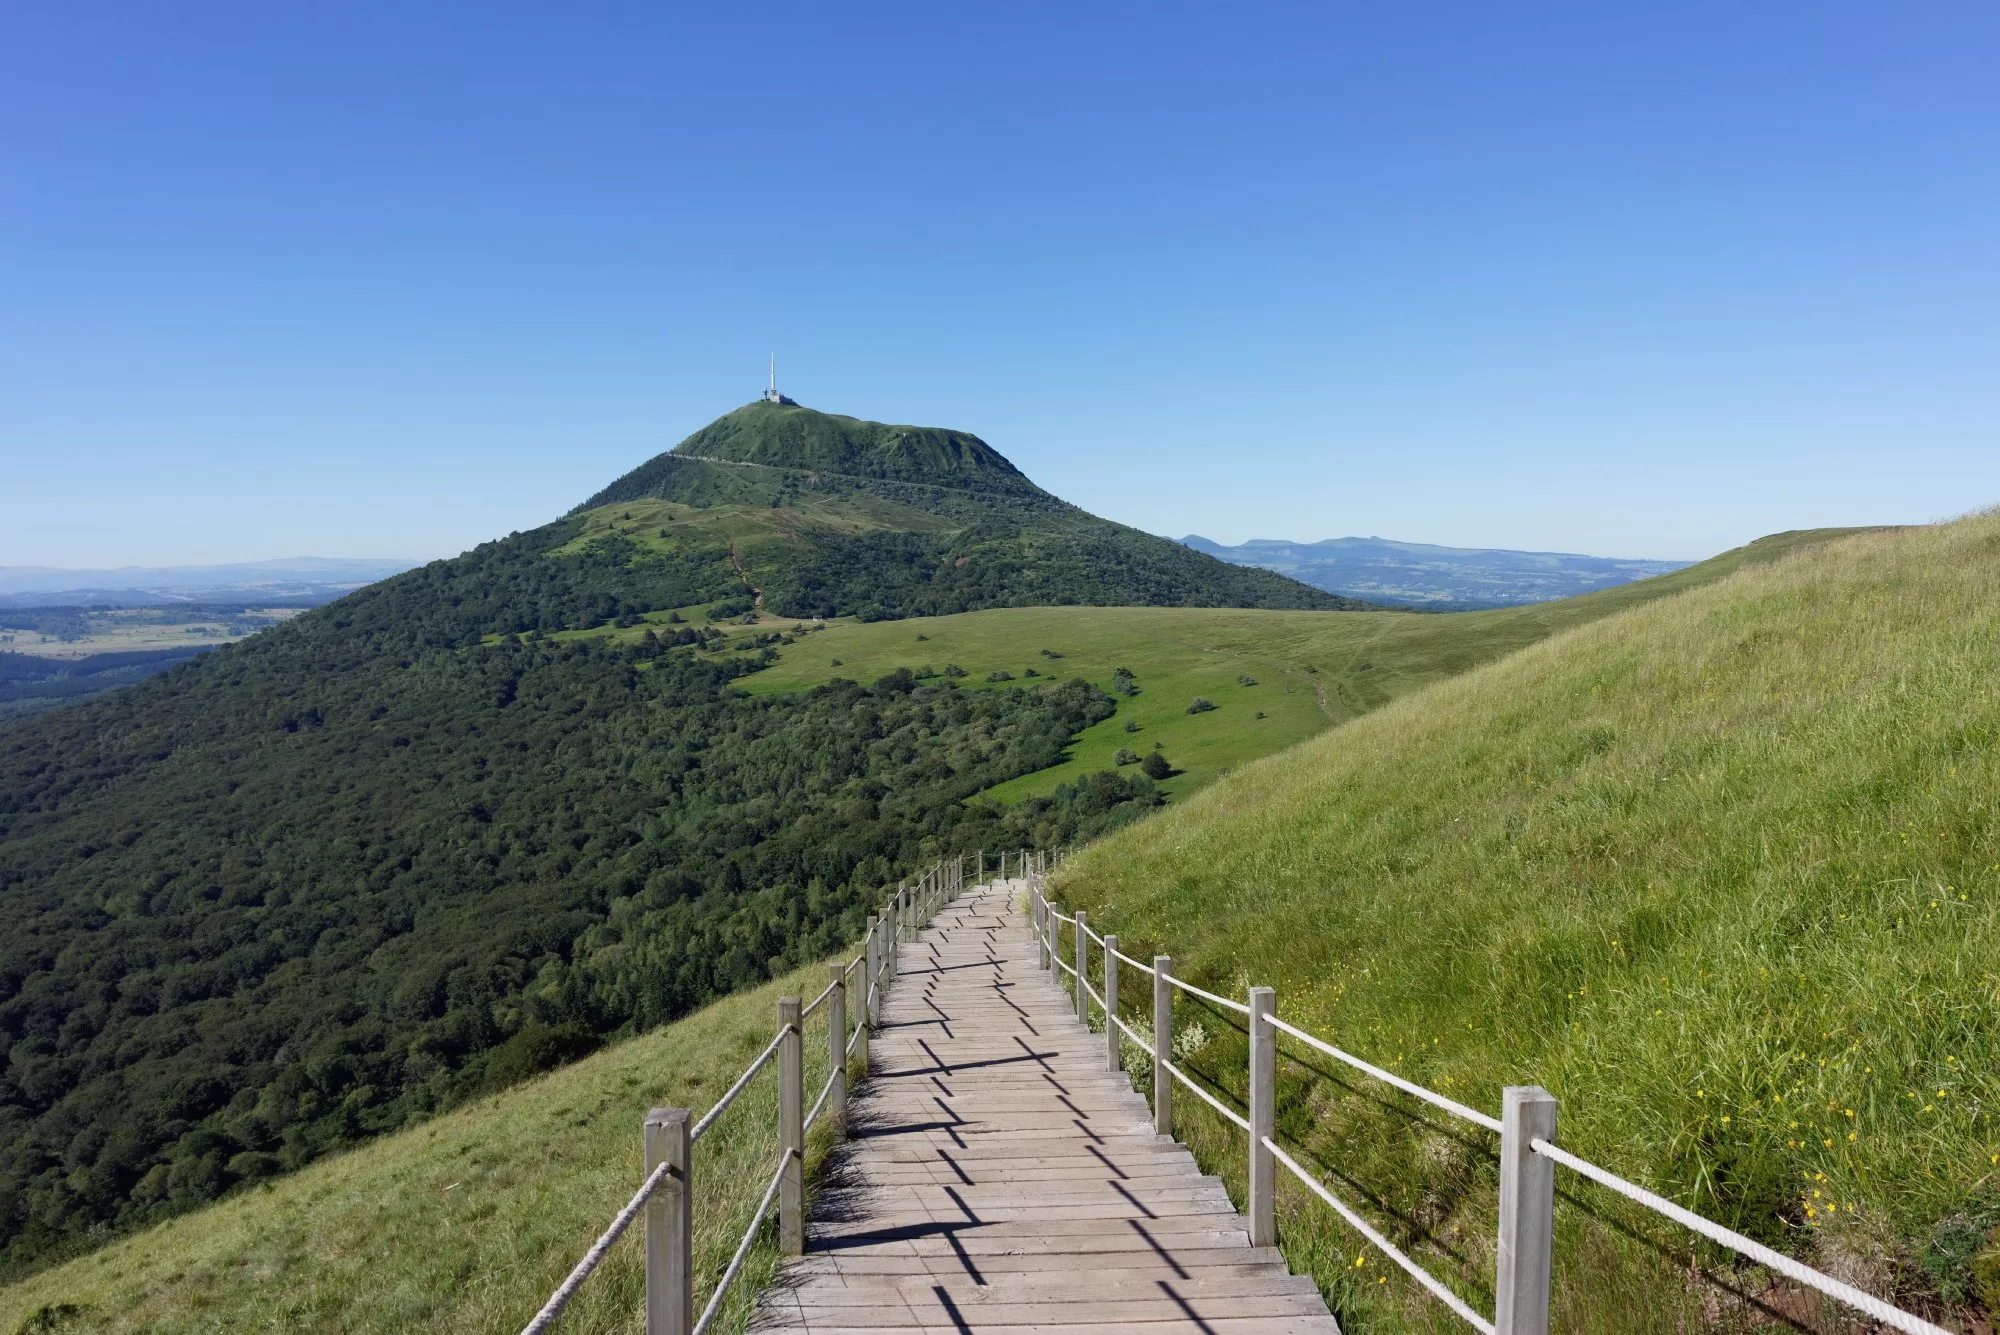 Puy de Dome in France, Europe | Volcanos - Rated 4.1